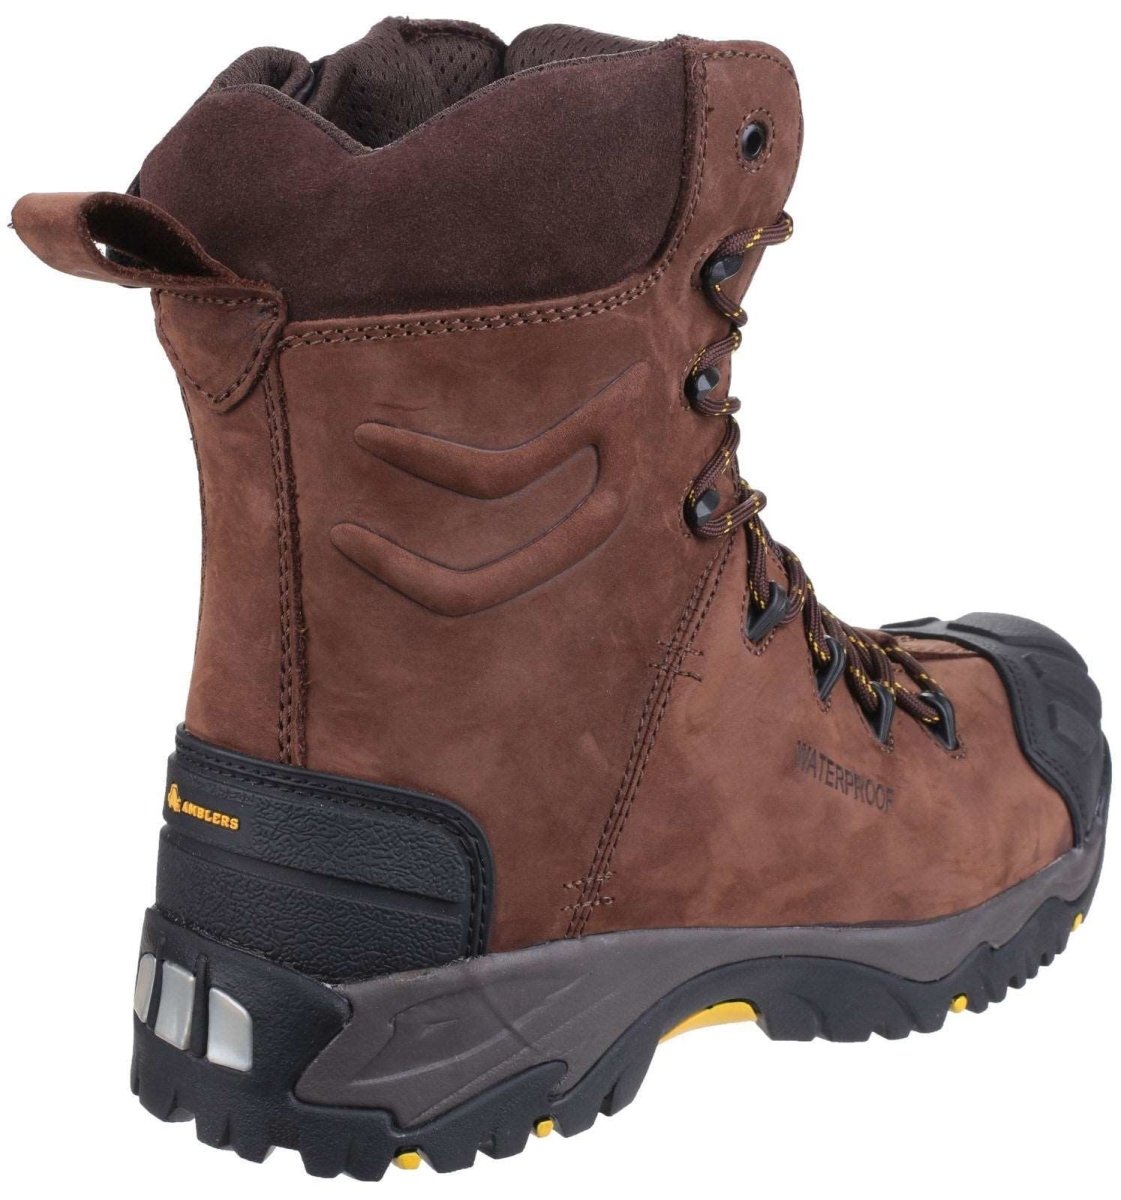 Amblers AS995 Pillar Mens Composite Waterproof Safety Boots - Shoe Store Direct